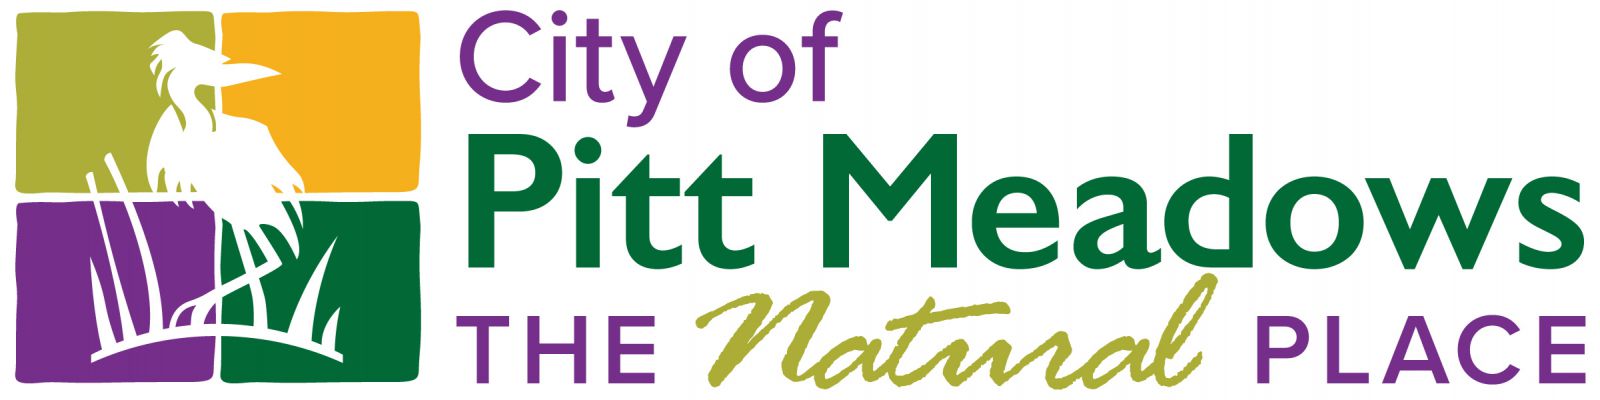 Image for City of Pitt Meadows: Council Renames the Pitt Meadows Day Royal Party and Eliminates Gender Requirements